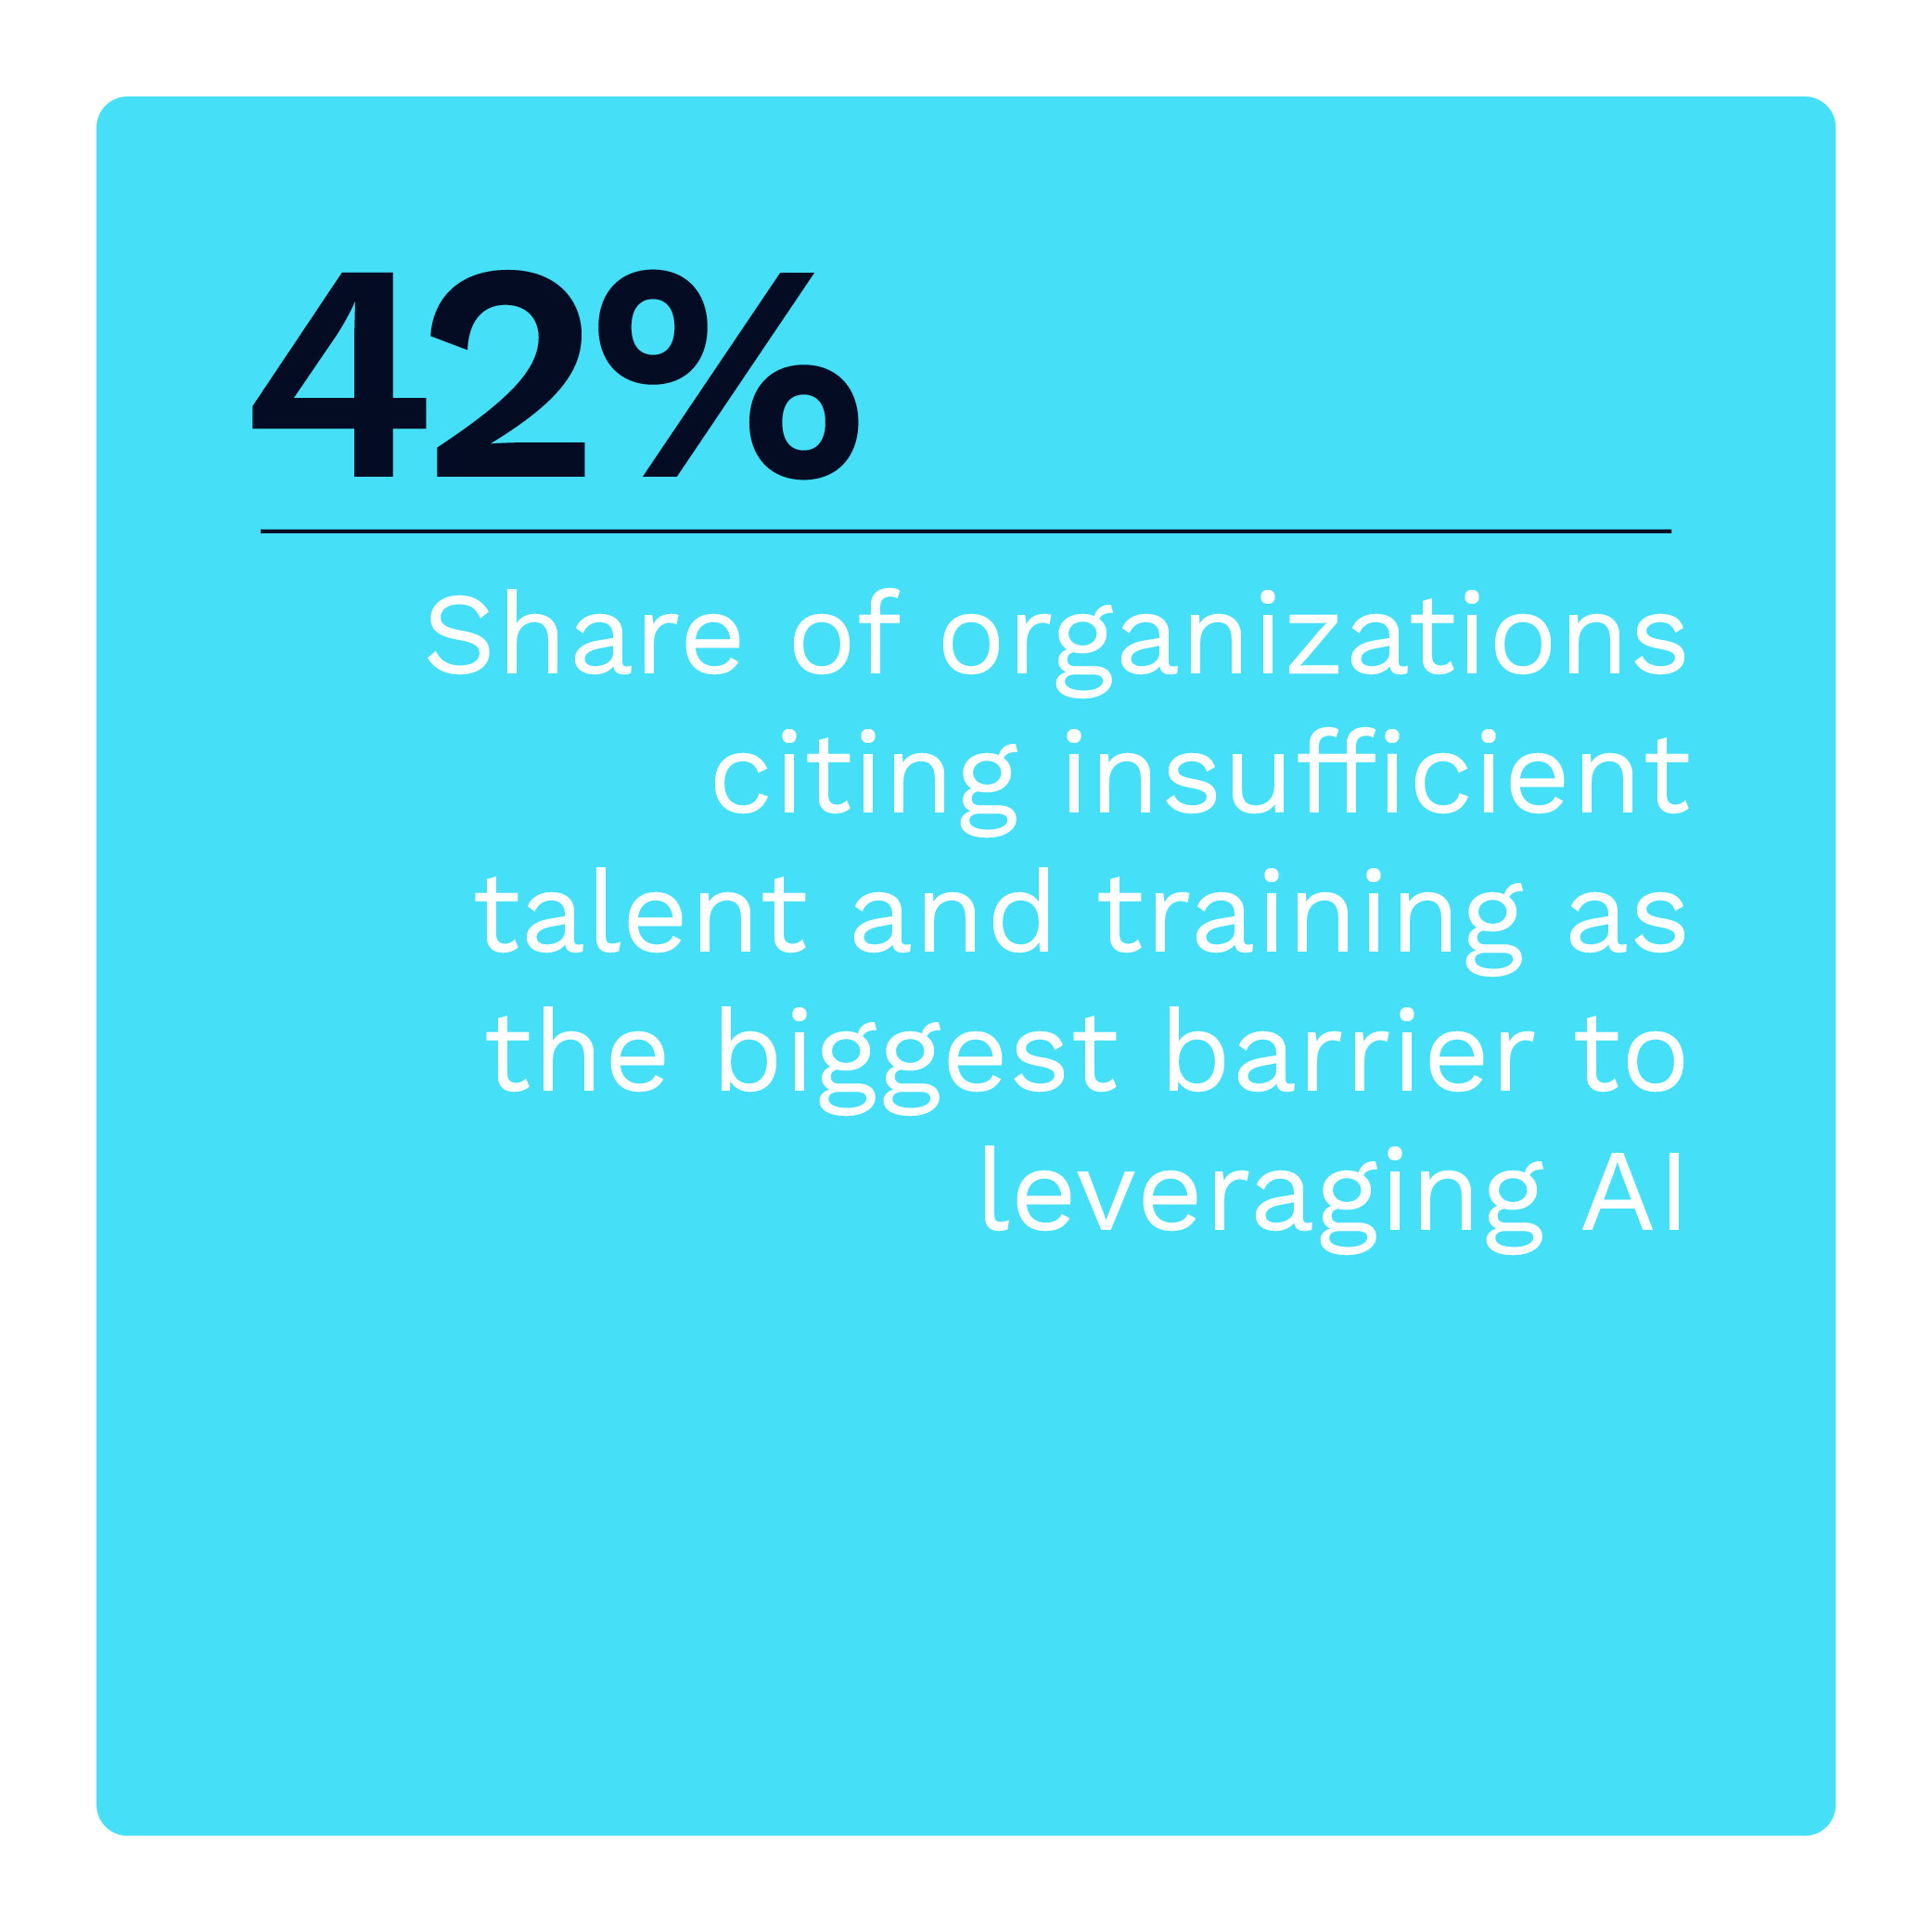 42%: Share of organizations citing insufficient talent and training as the biggest barrier to leveraging AI